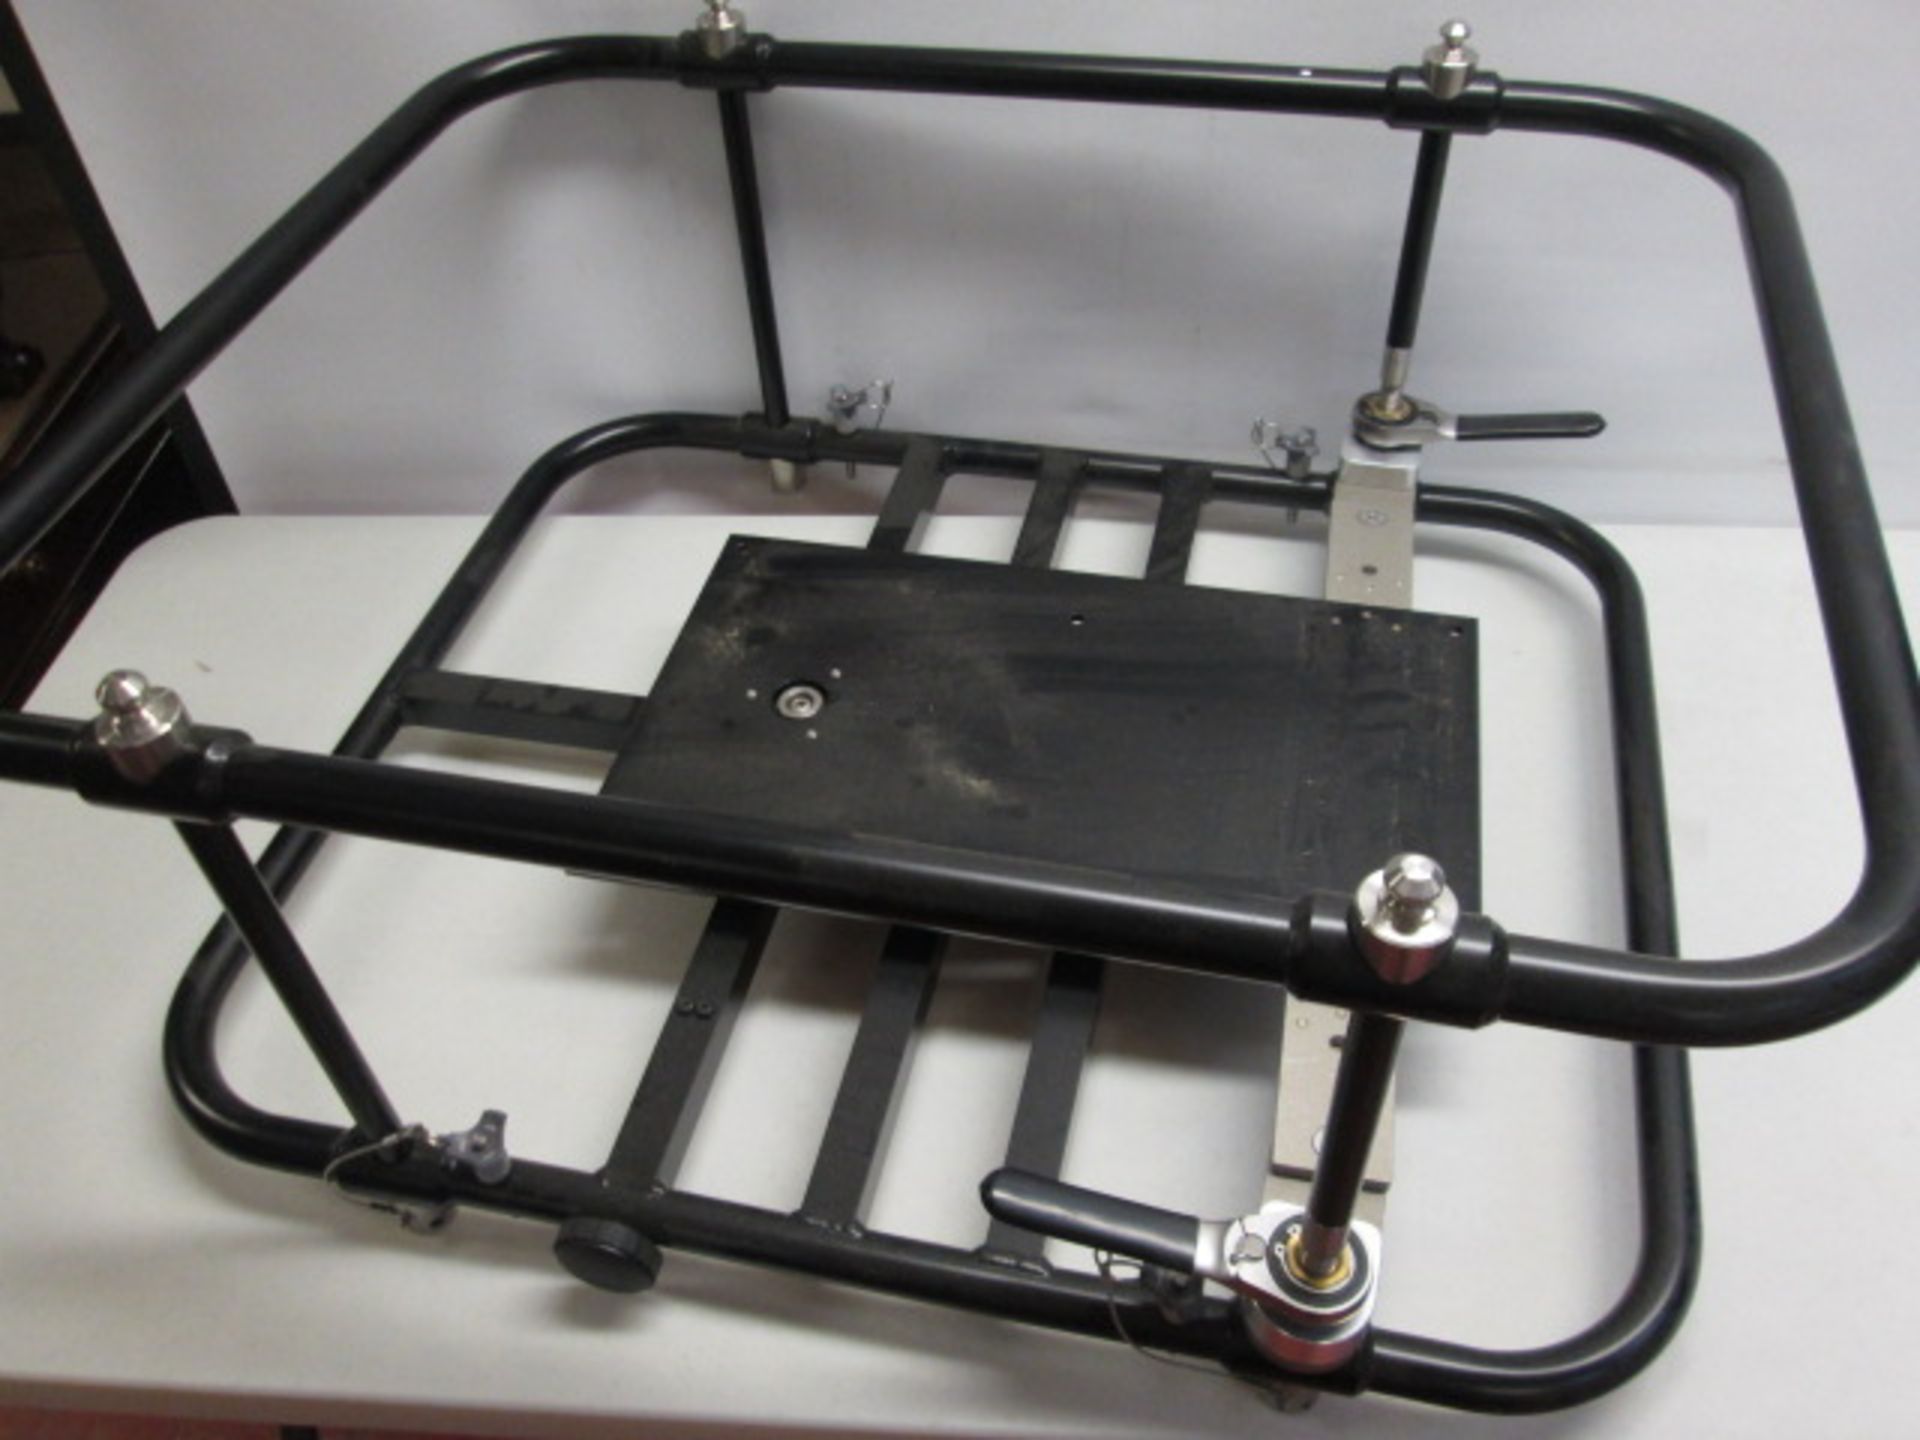 Bespoke Adjustable Projector Cradle. (Believed to be used with the Panasonic PT-DZ870). - Image 2 of 3